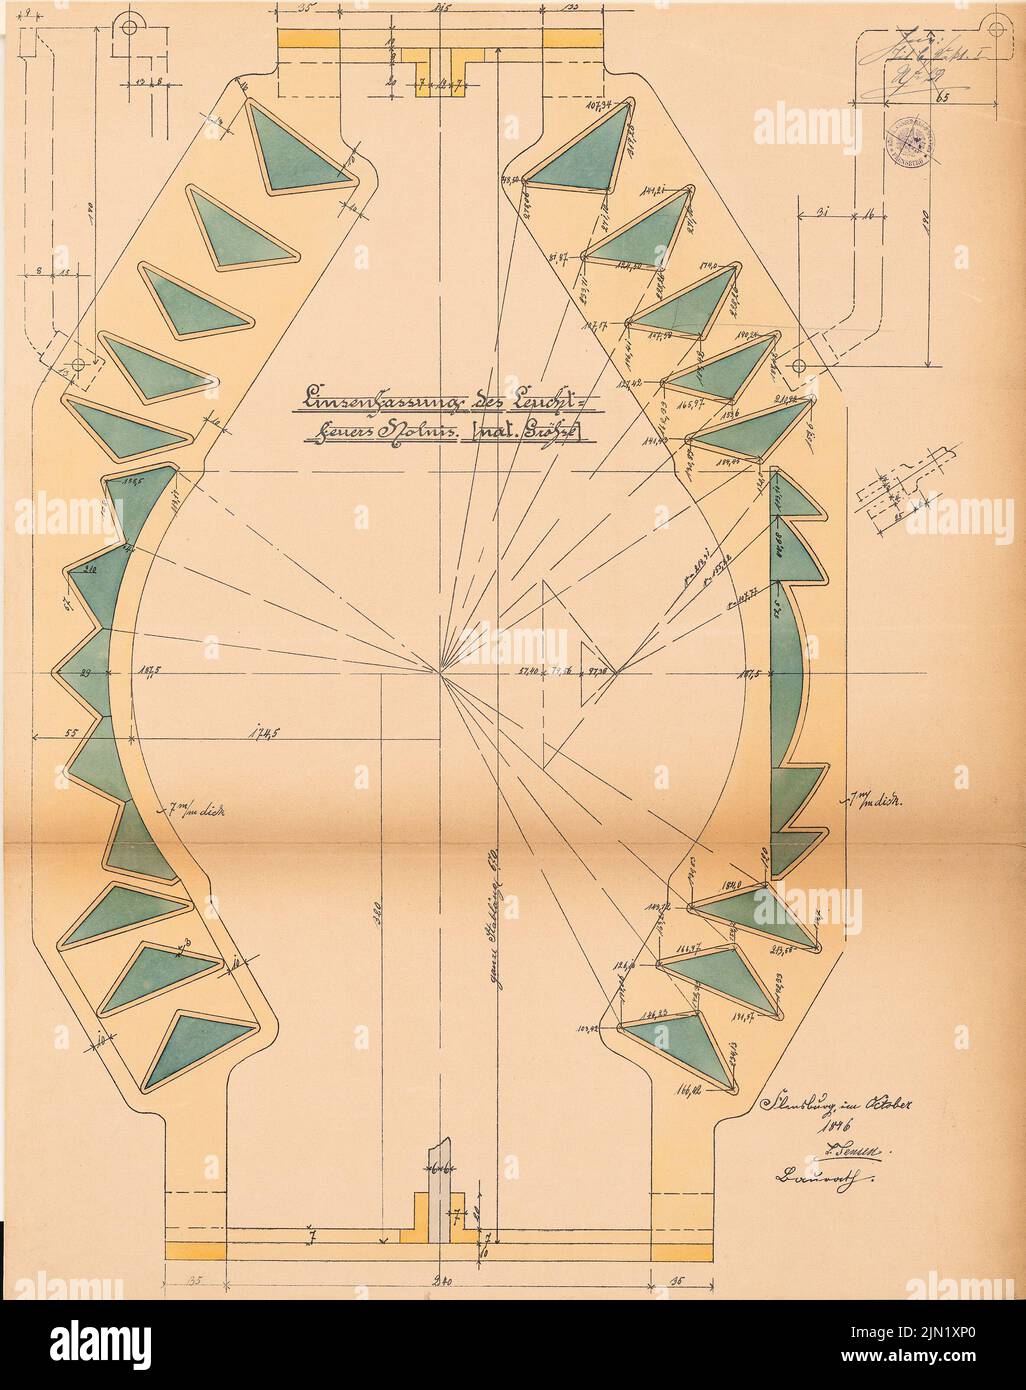 N.N., guiding fire building, Holnis: lens version: cuts, details. Lithograph colored on paper, 72.8 x 57.5 cm (including scan edges) N.N. : Leitfeuergebäude, Holnis Stock Photo